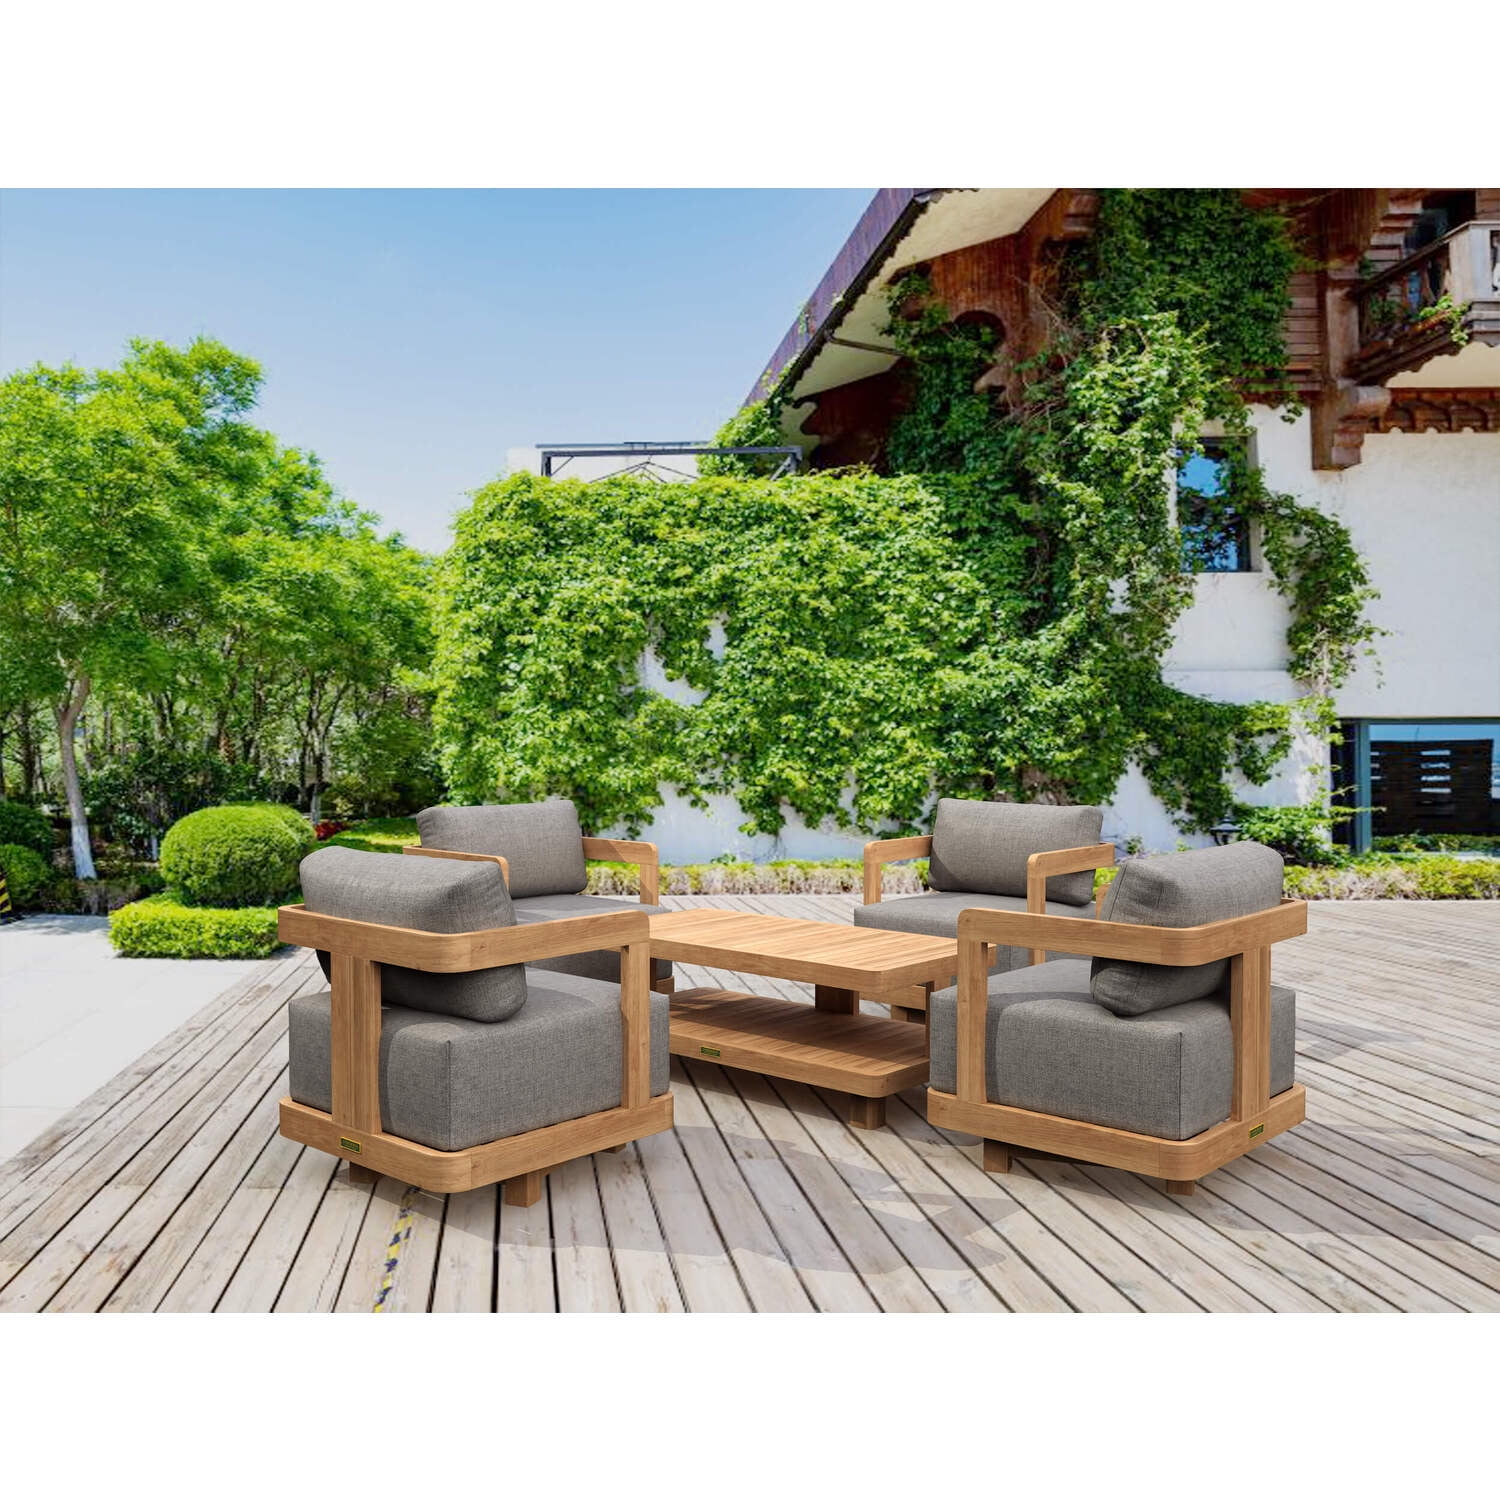 Picture of Anderson Teak SET-904 Granada Deep Seating Set, Natural Smooth Well Sanded - 5 Piece